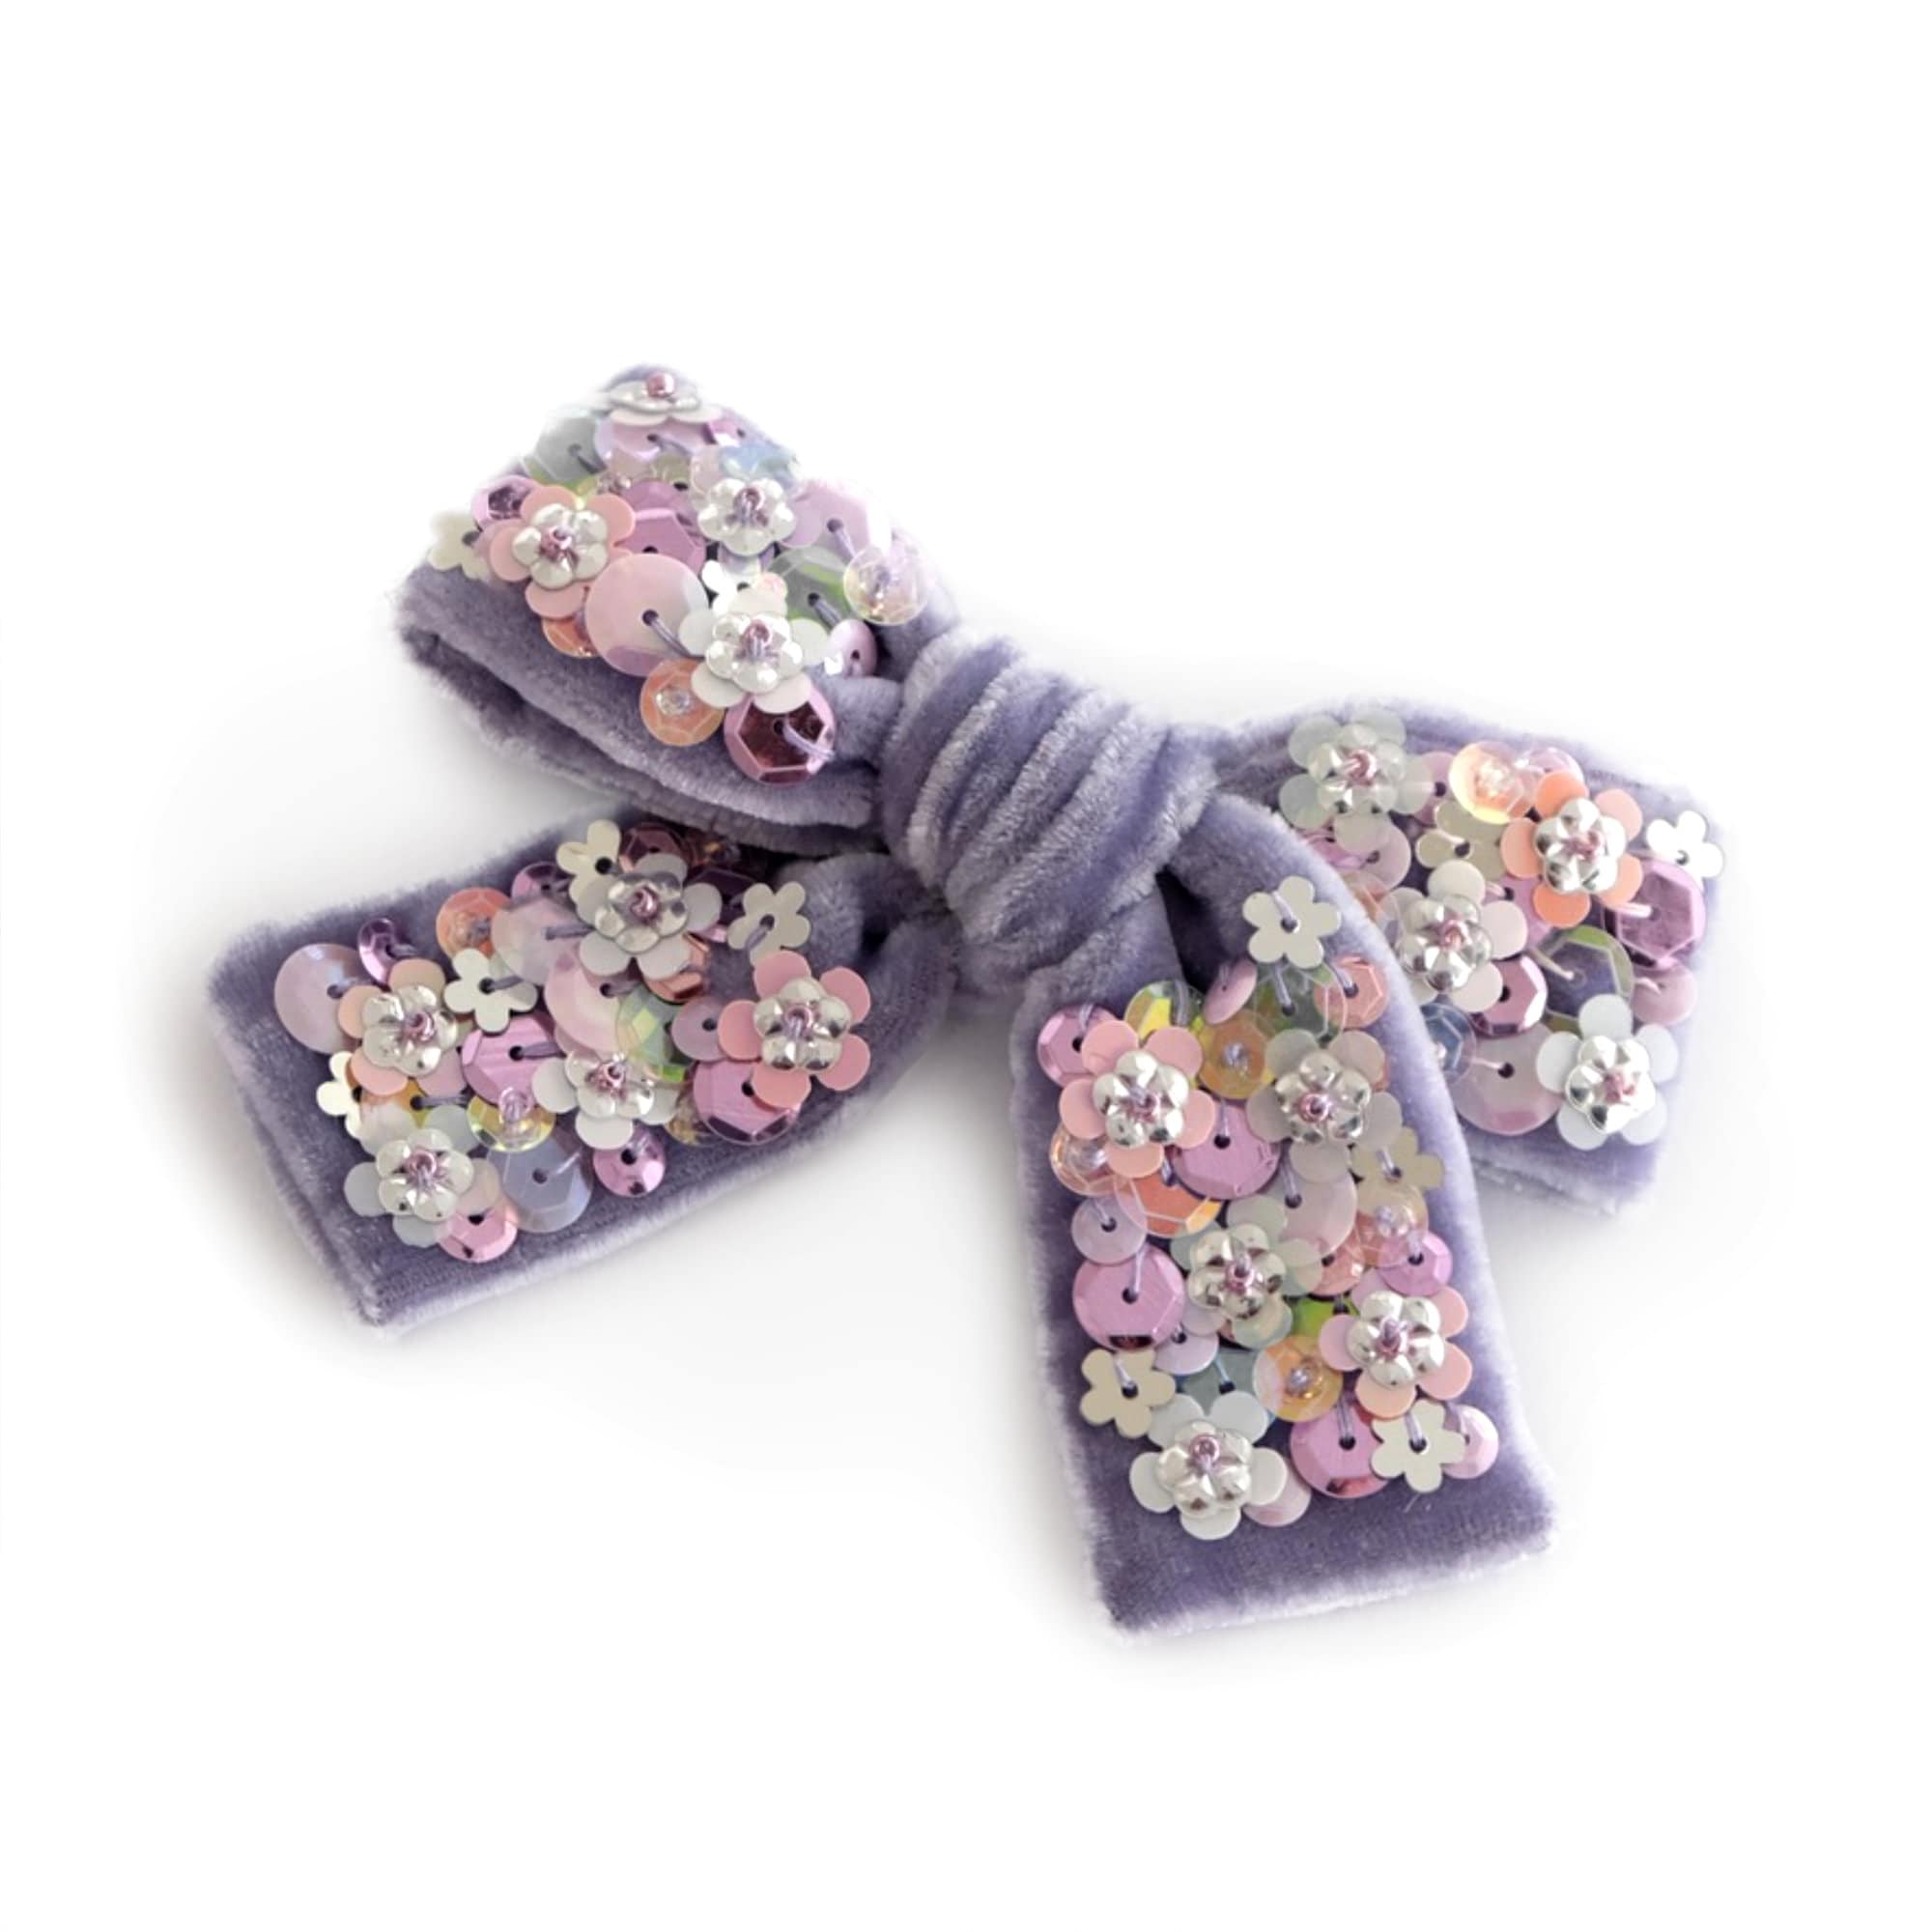 Purple Velvet Ribbon Bows in Your Choice of Size and Color. 3, 4 & 5 Sizes  Available in Plum, Grape, Dark or Regular Purple or Lavender 